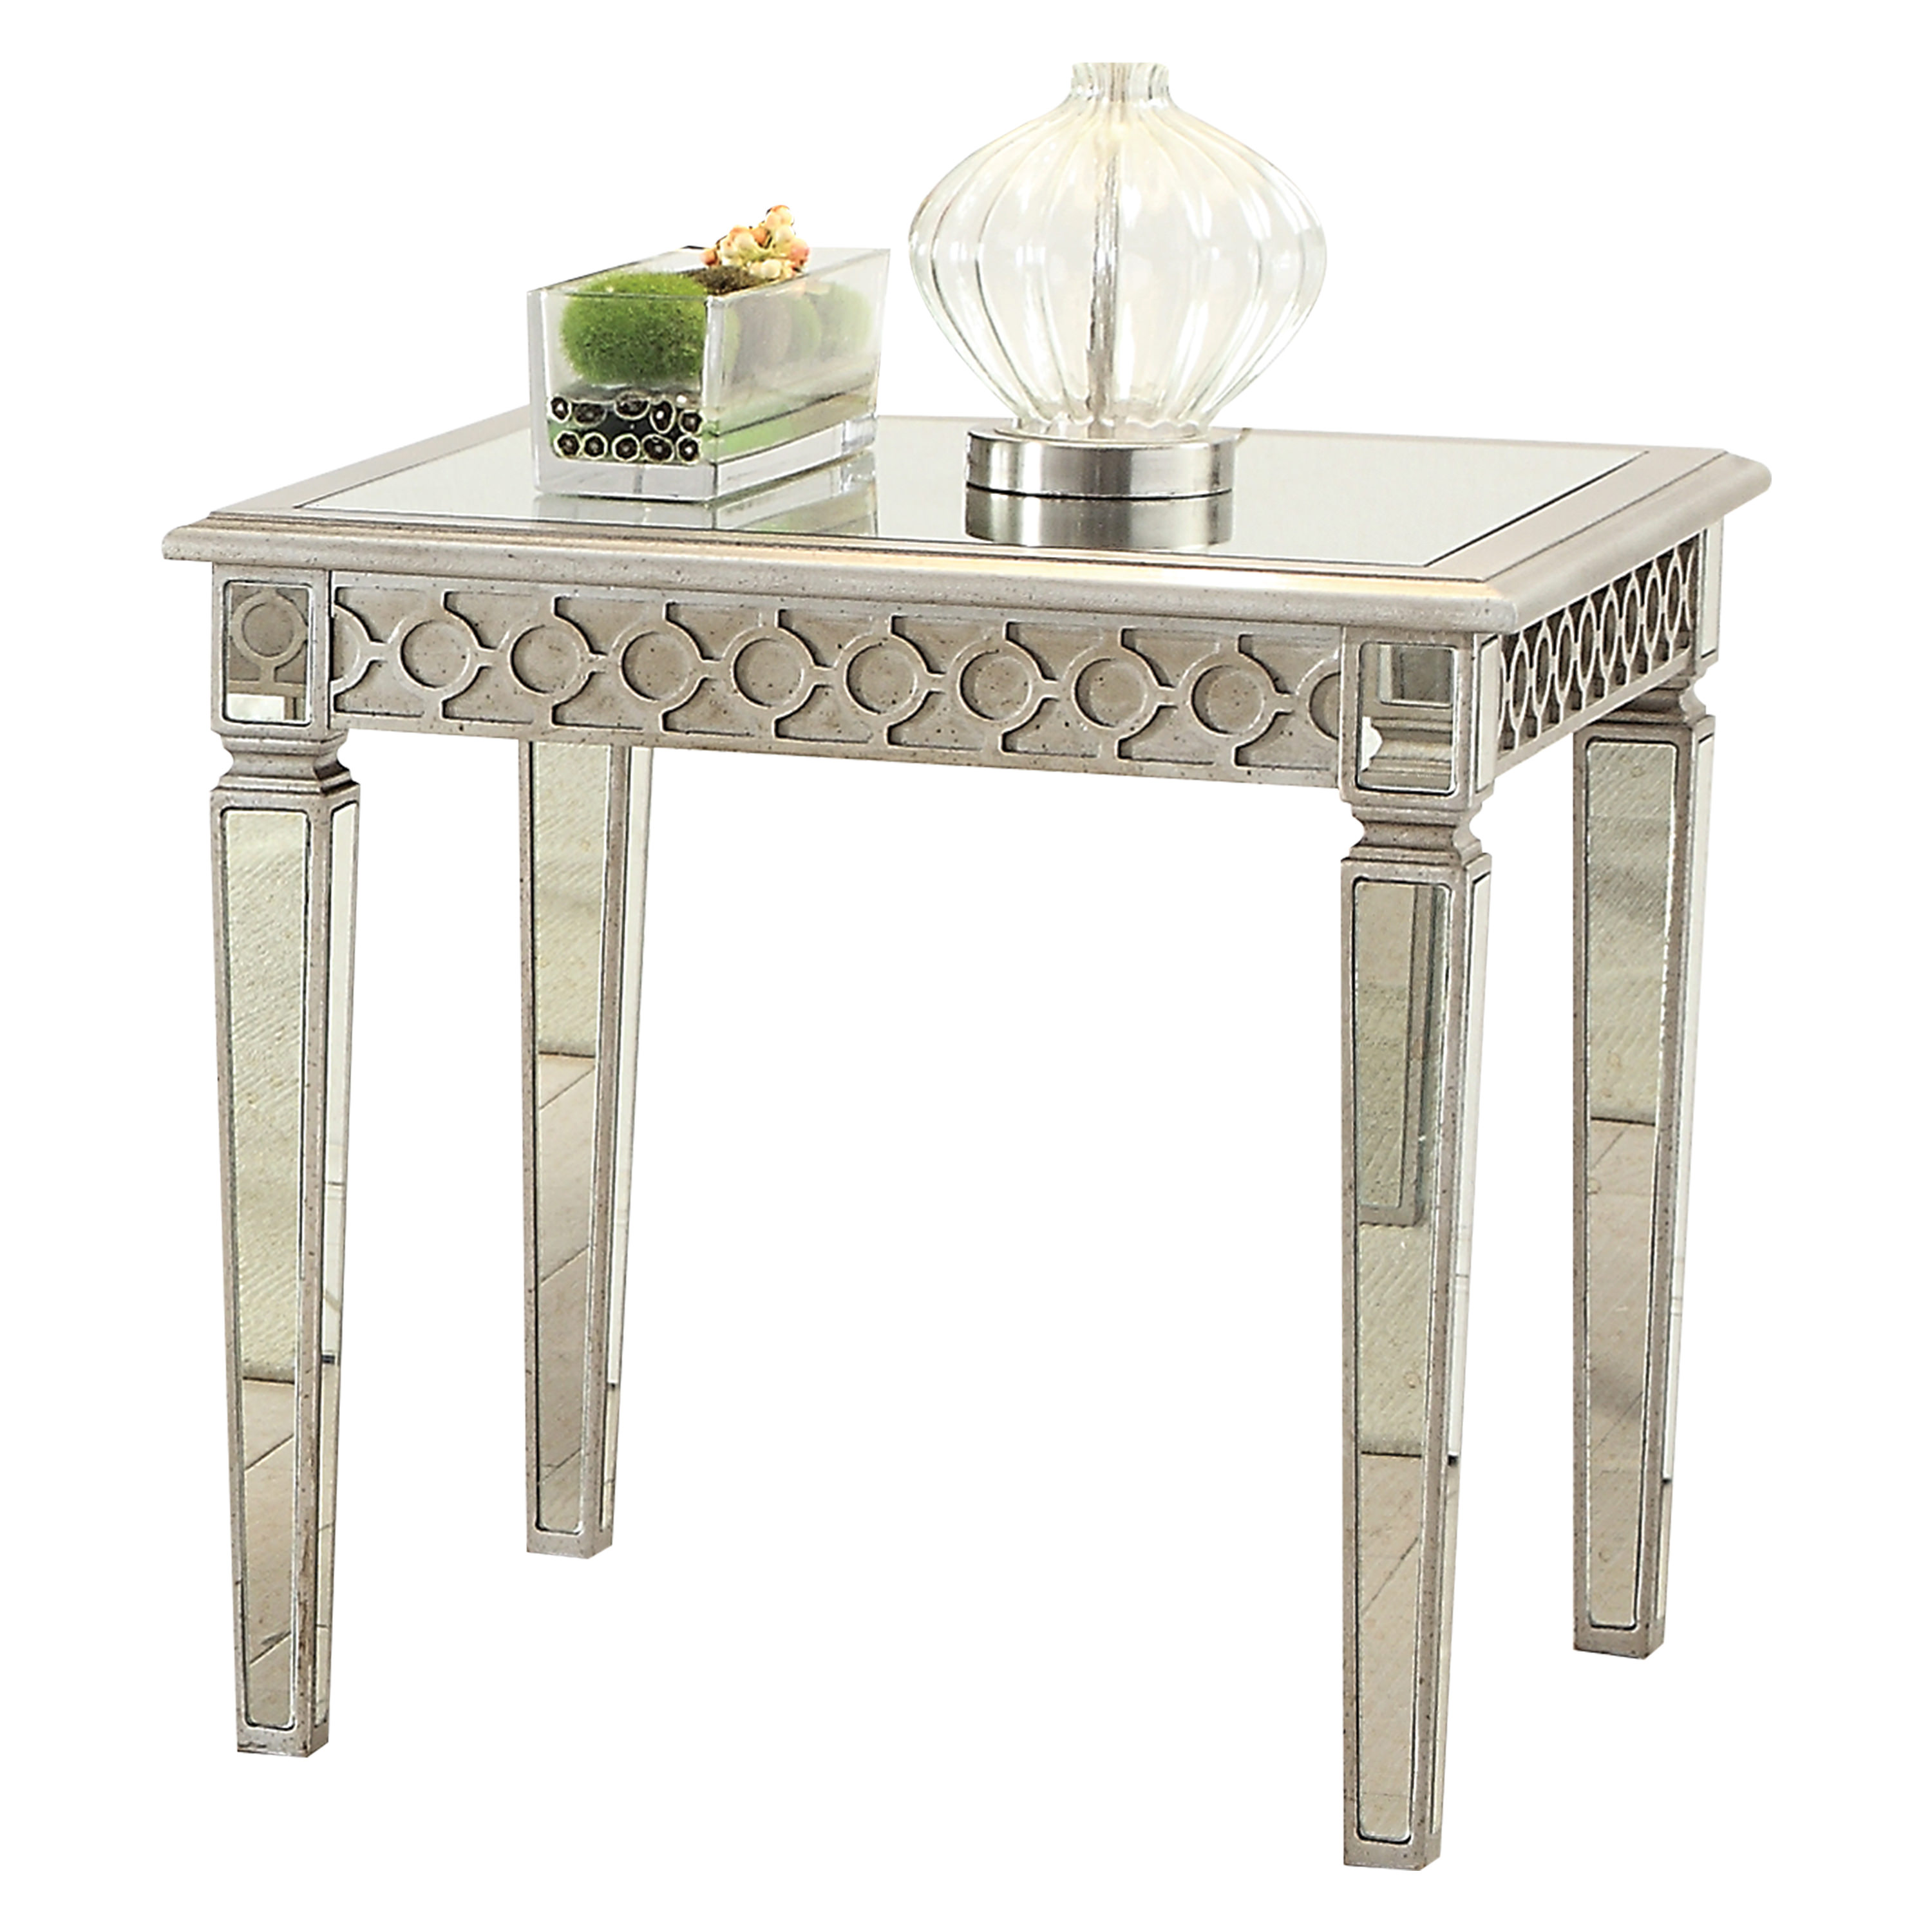 Acme Kacela Square Mirrored End Table in Champagne - image 1 of 2